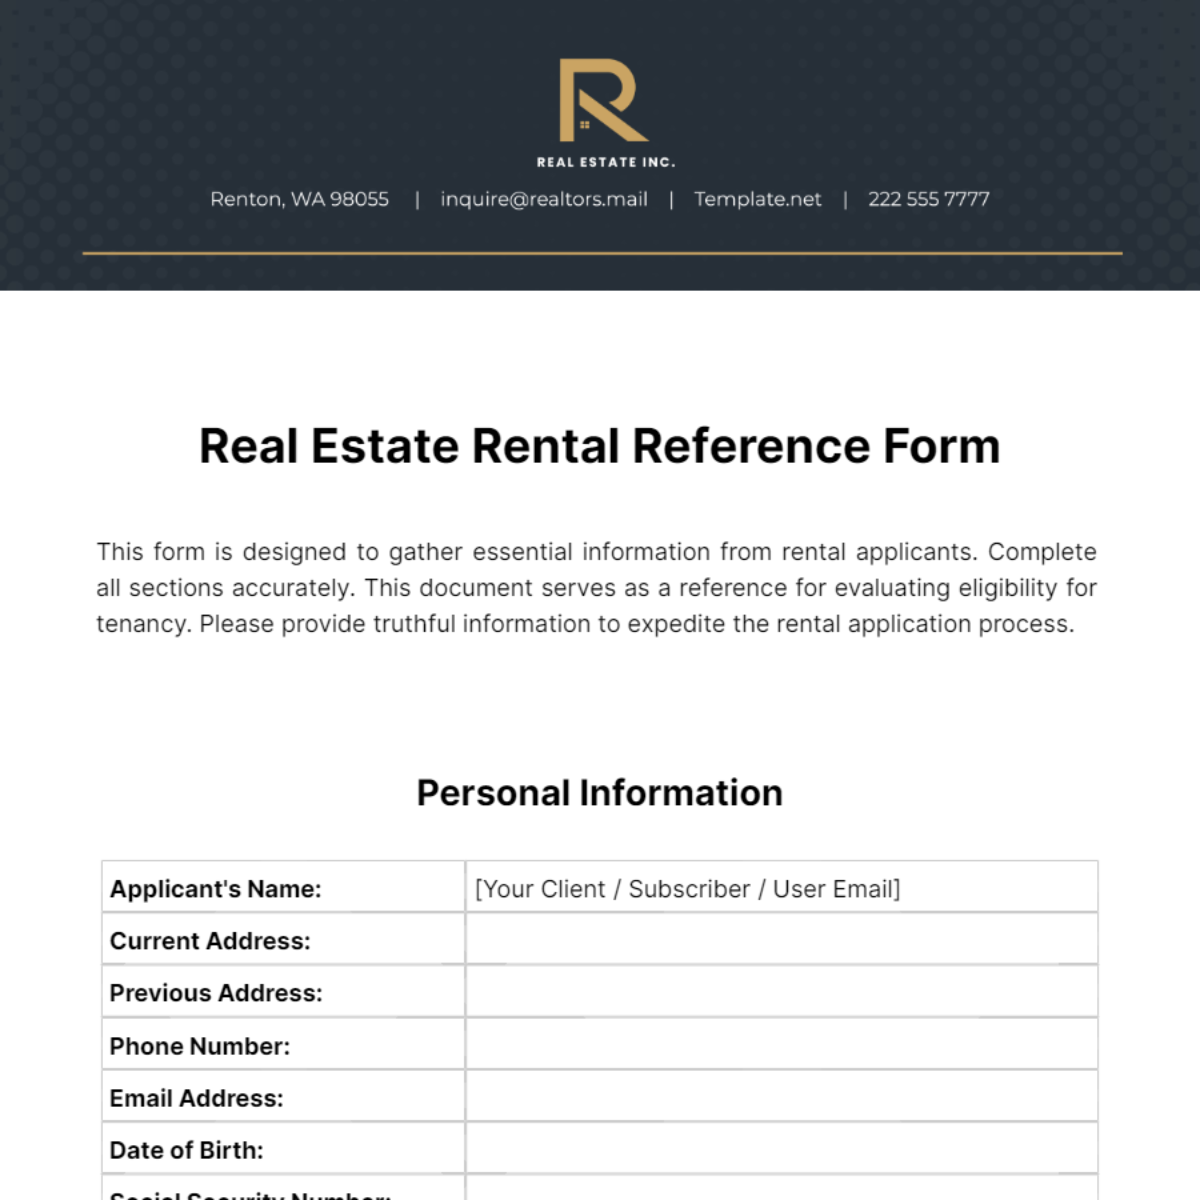 Real Estate Rental Reference Form Template